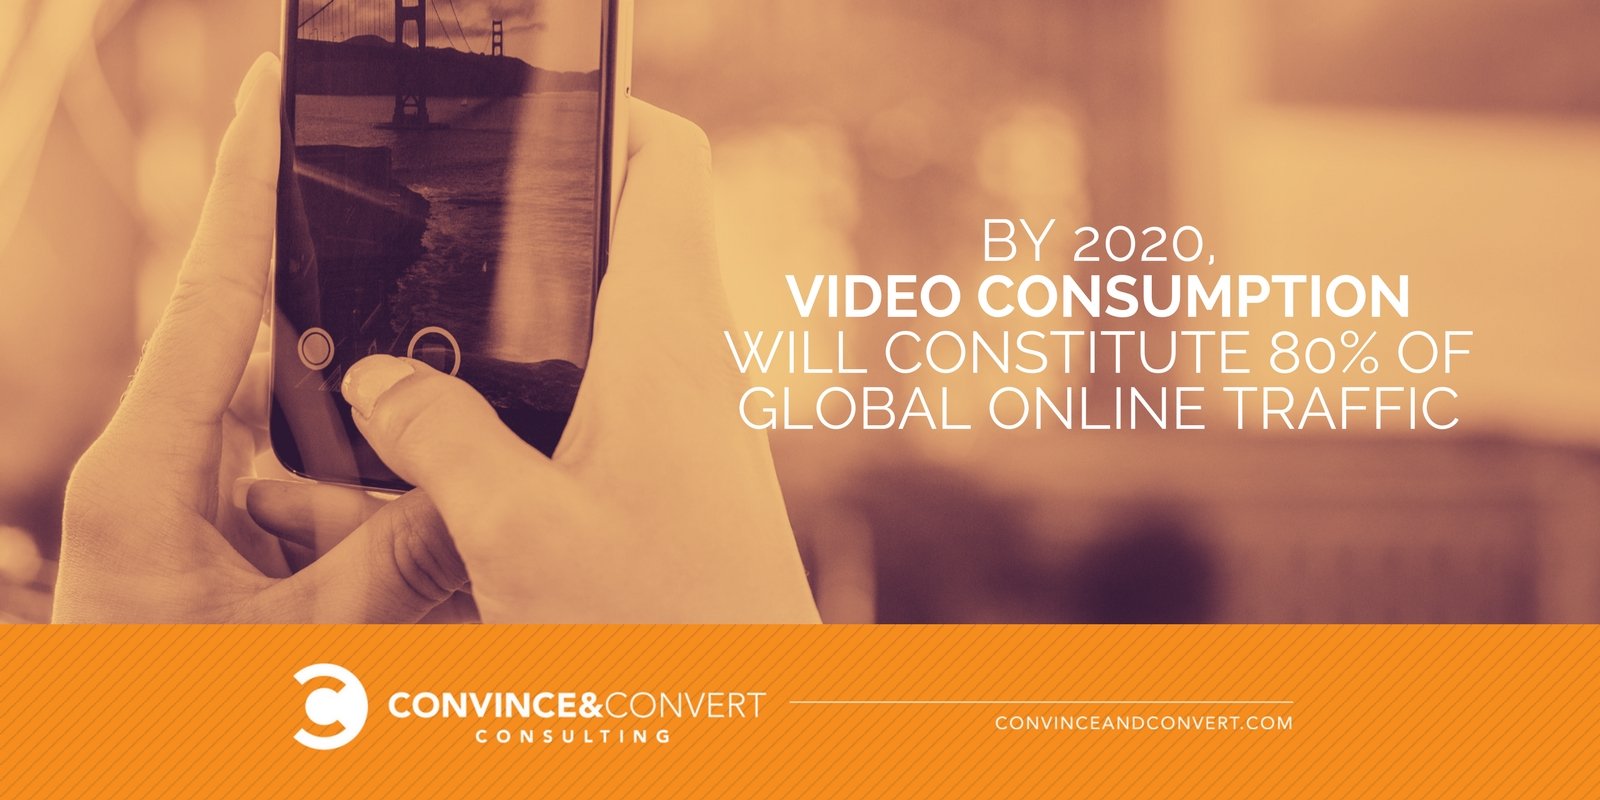 Video will constitute 80 percent of traffic by 2020